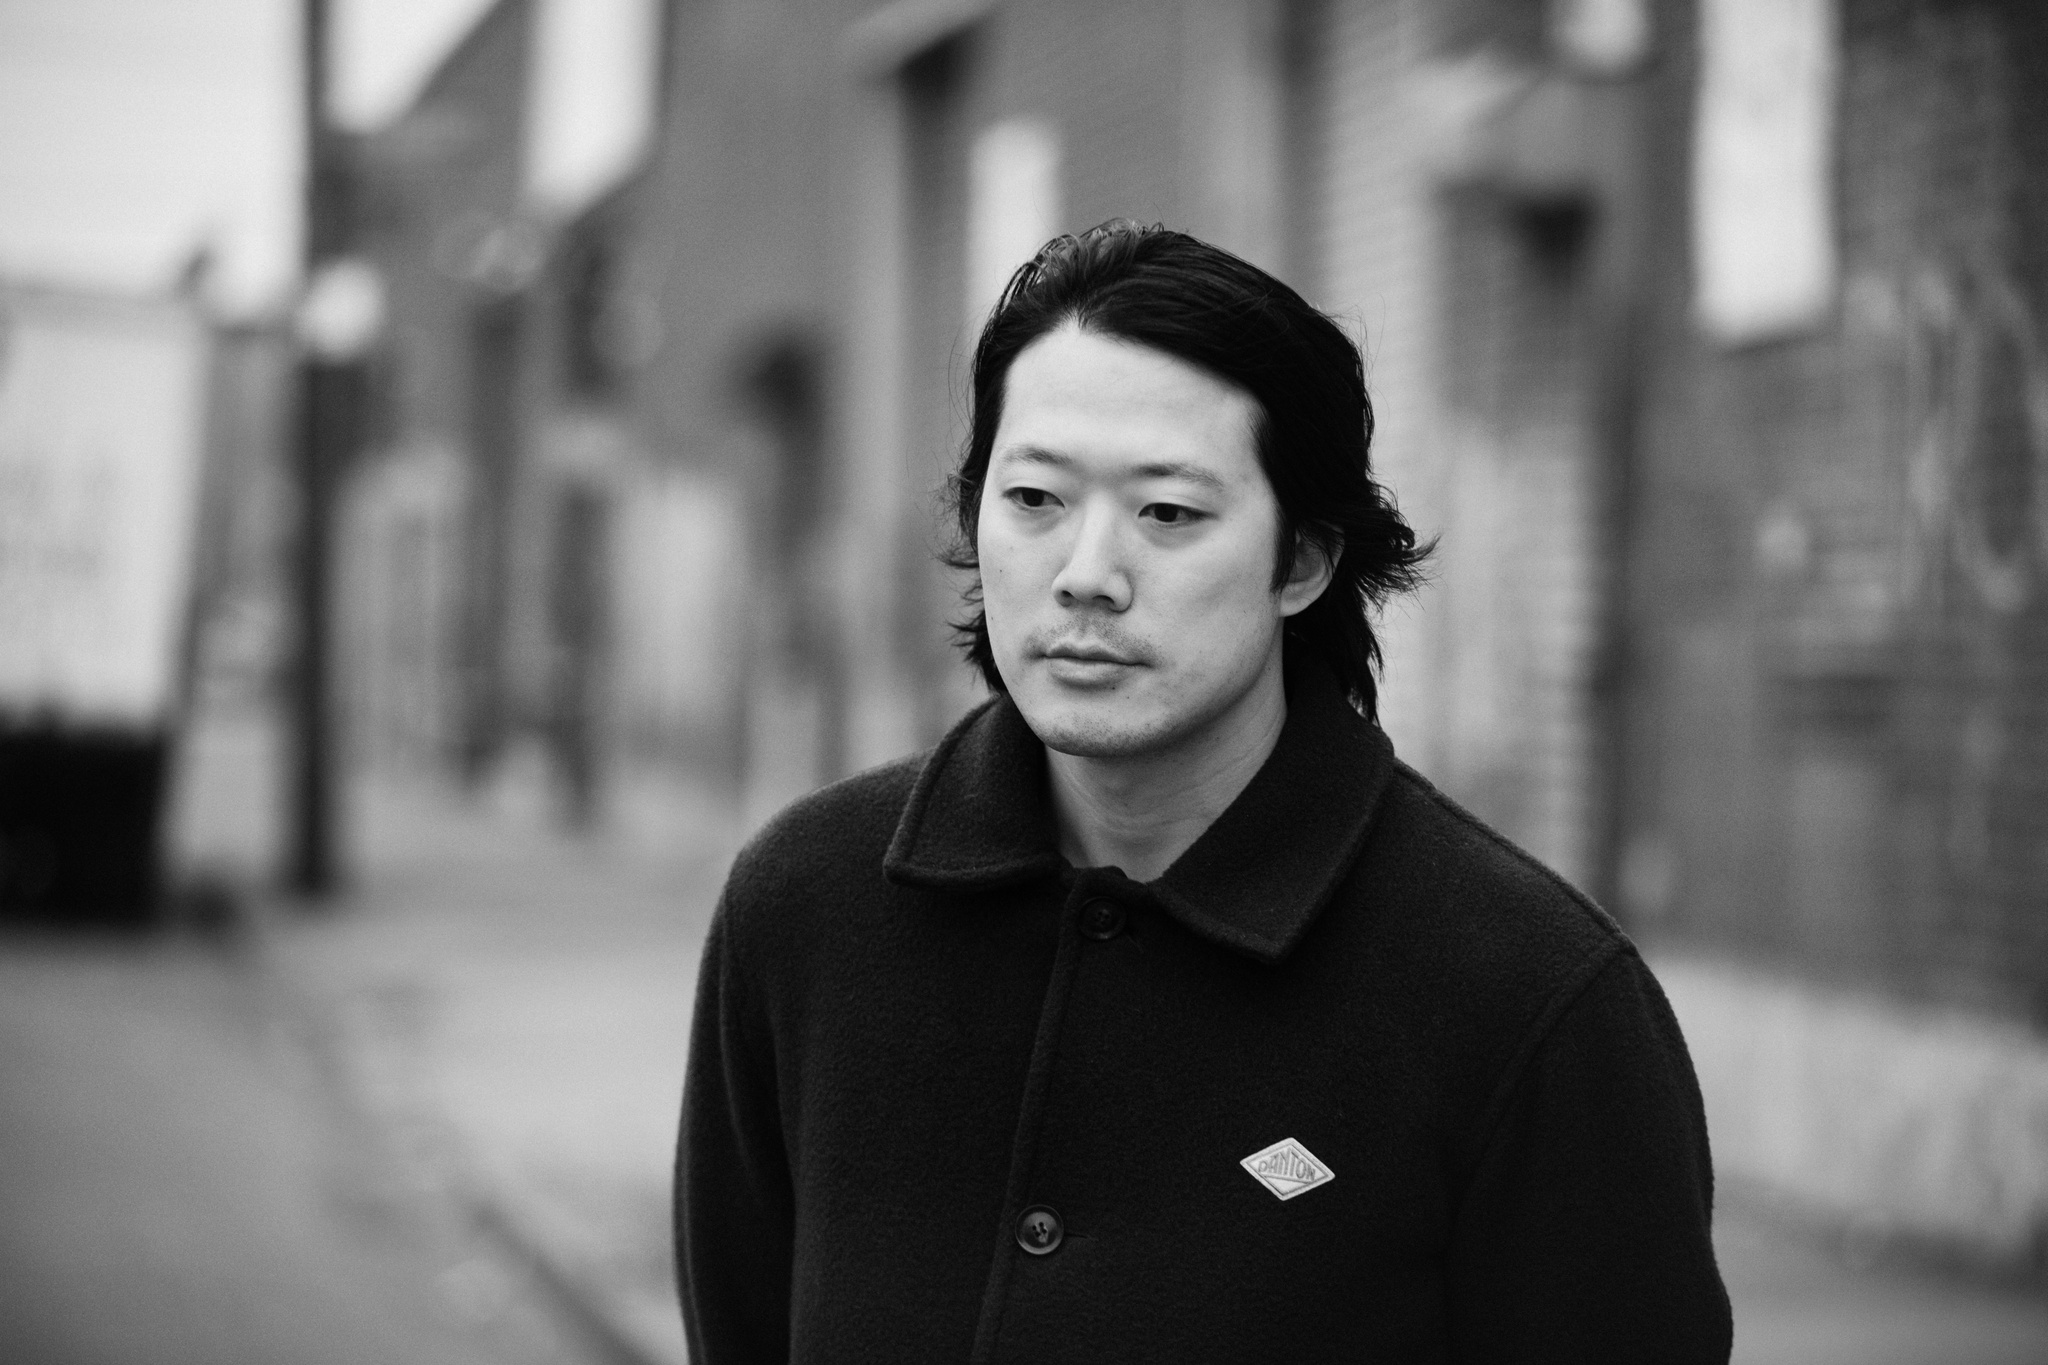 A photo of the artist Kenneth Tam on a street with blurry warehouse buildings behind him. Tam wears a dark wool coat and has his hair tucked behind his ears.